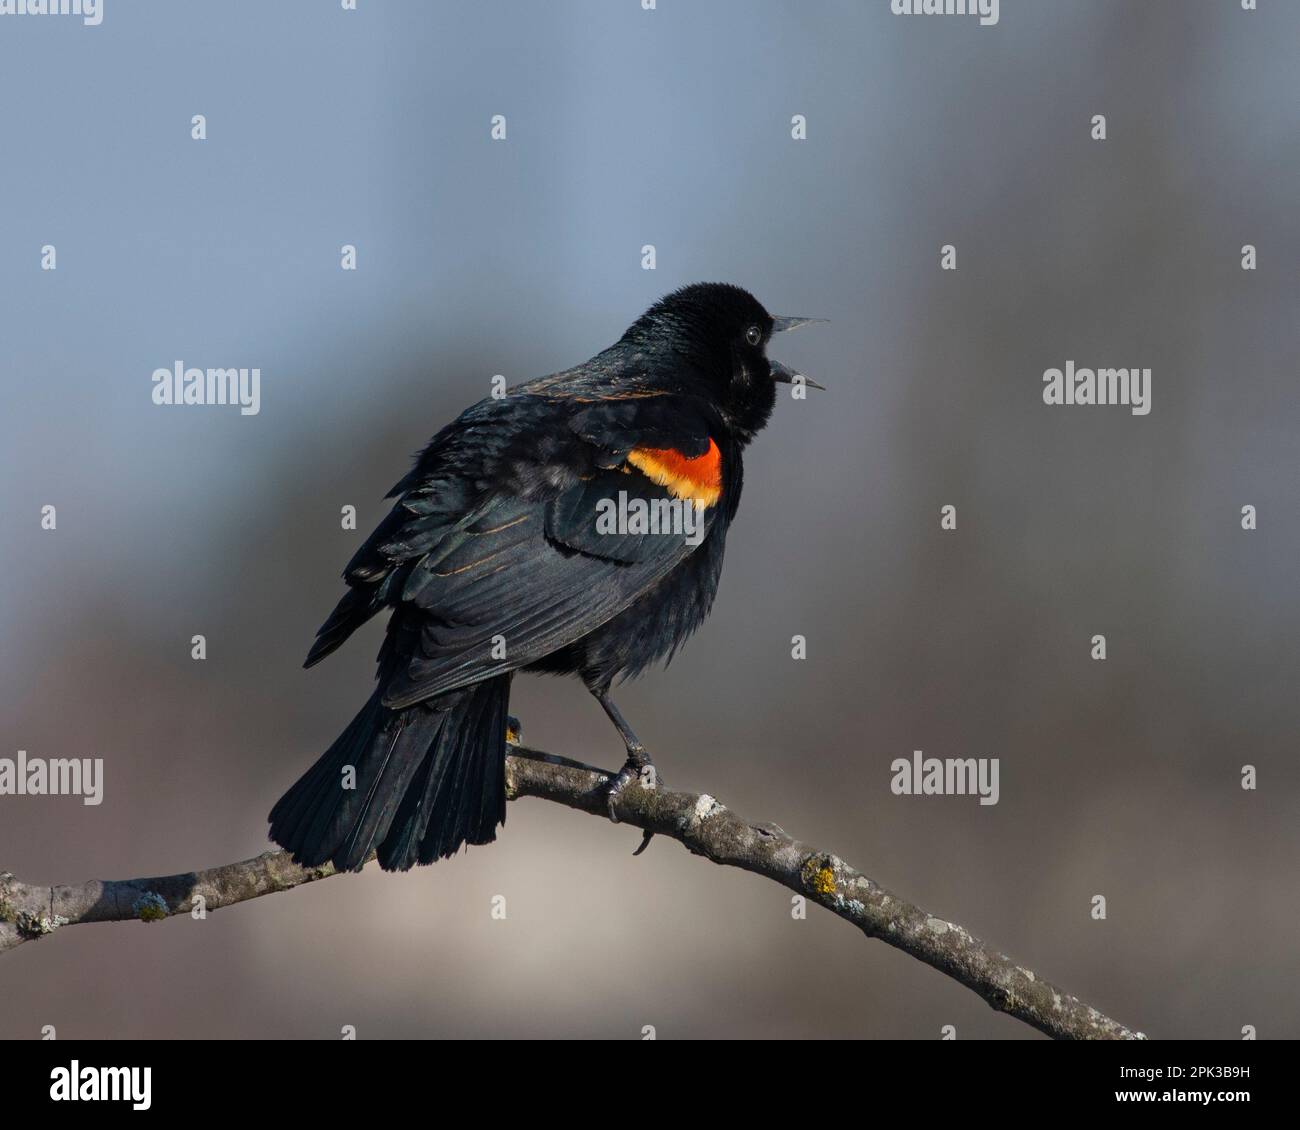 A small red-winged blackbird is perched atop a thin branch of a tree, its wings spread widely as it surveys its surroundings Stock Photo